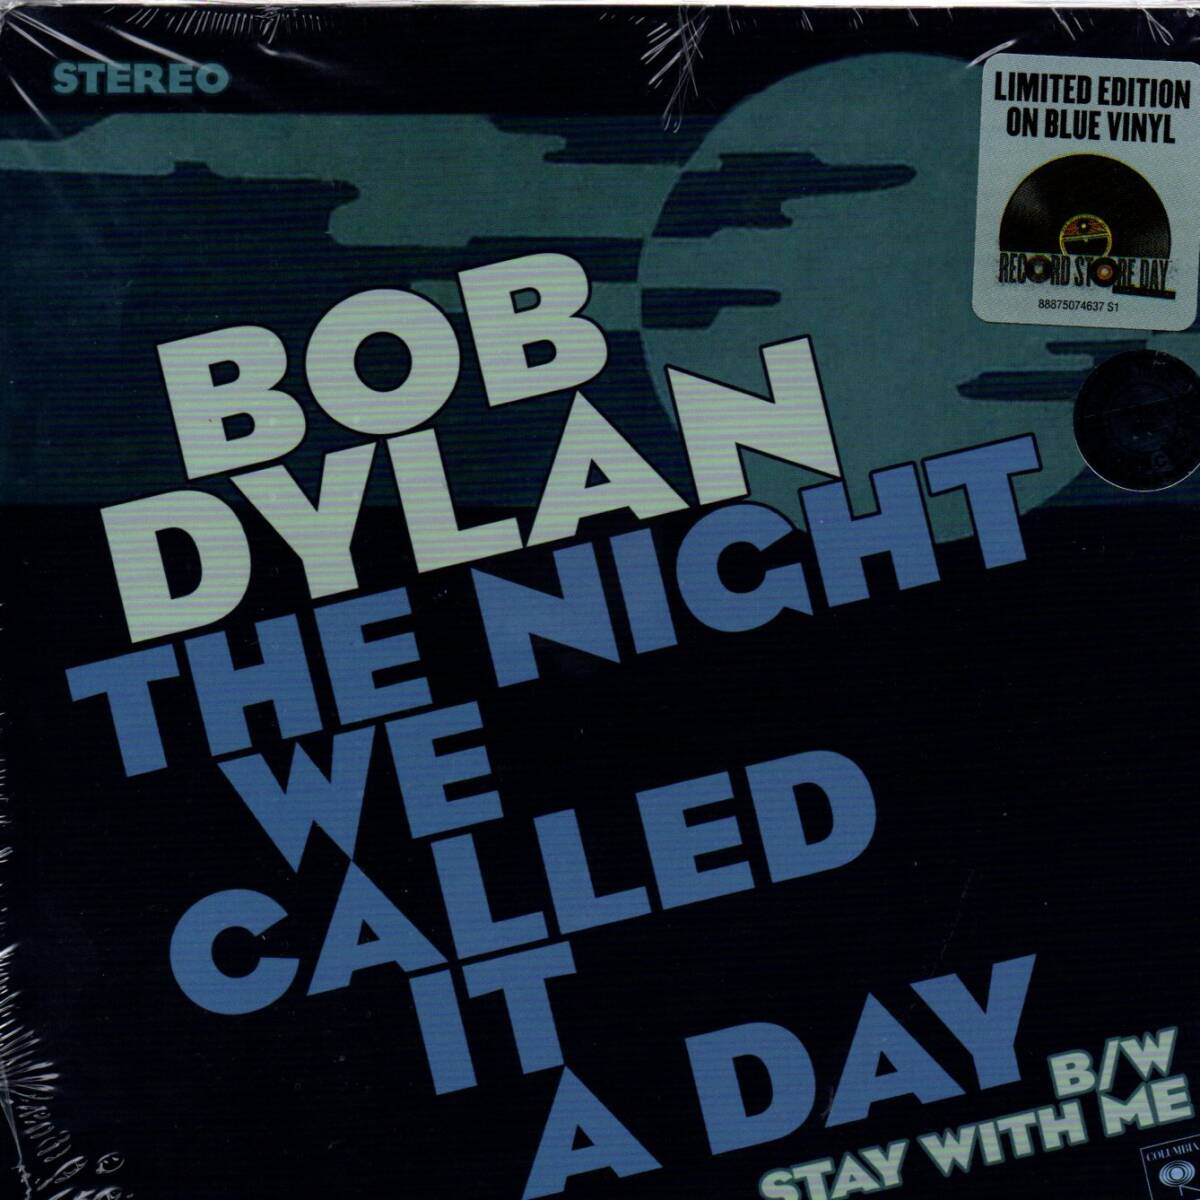 Bob Dylan 「The Night We Call It A Day/ Say With Me」米国盤青色カラーEPレコード_画像1